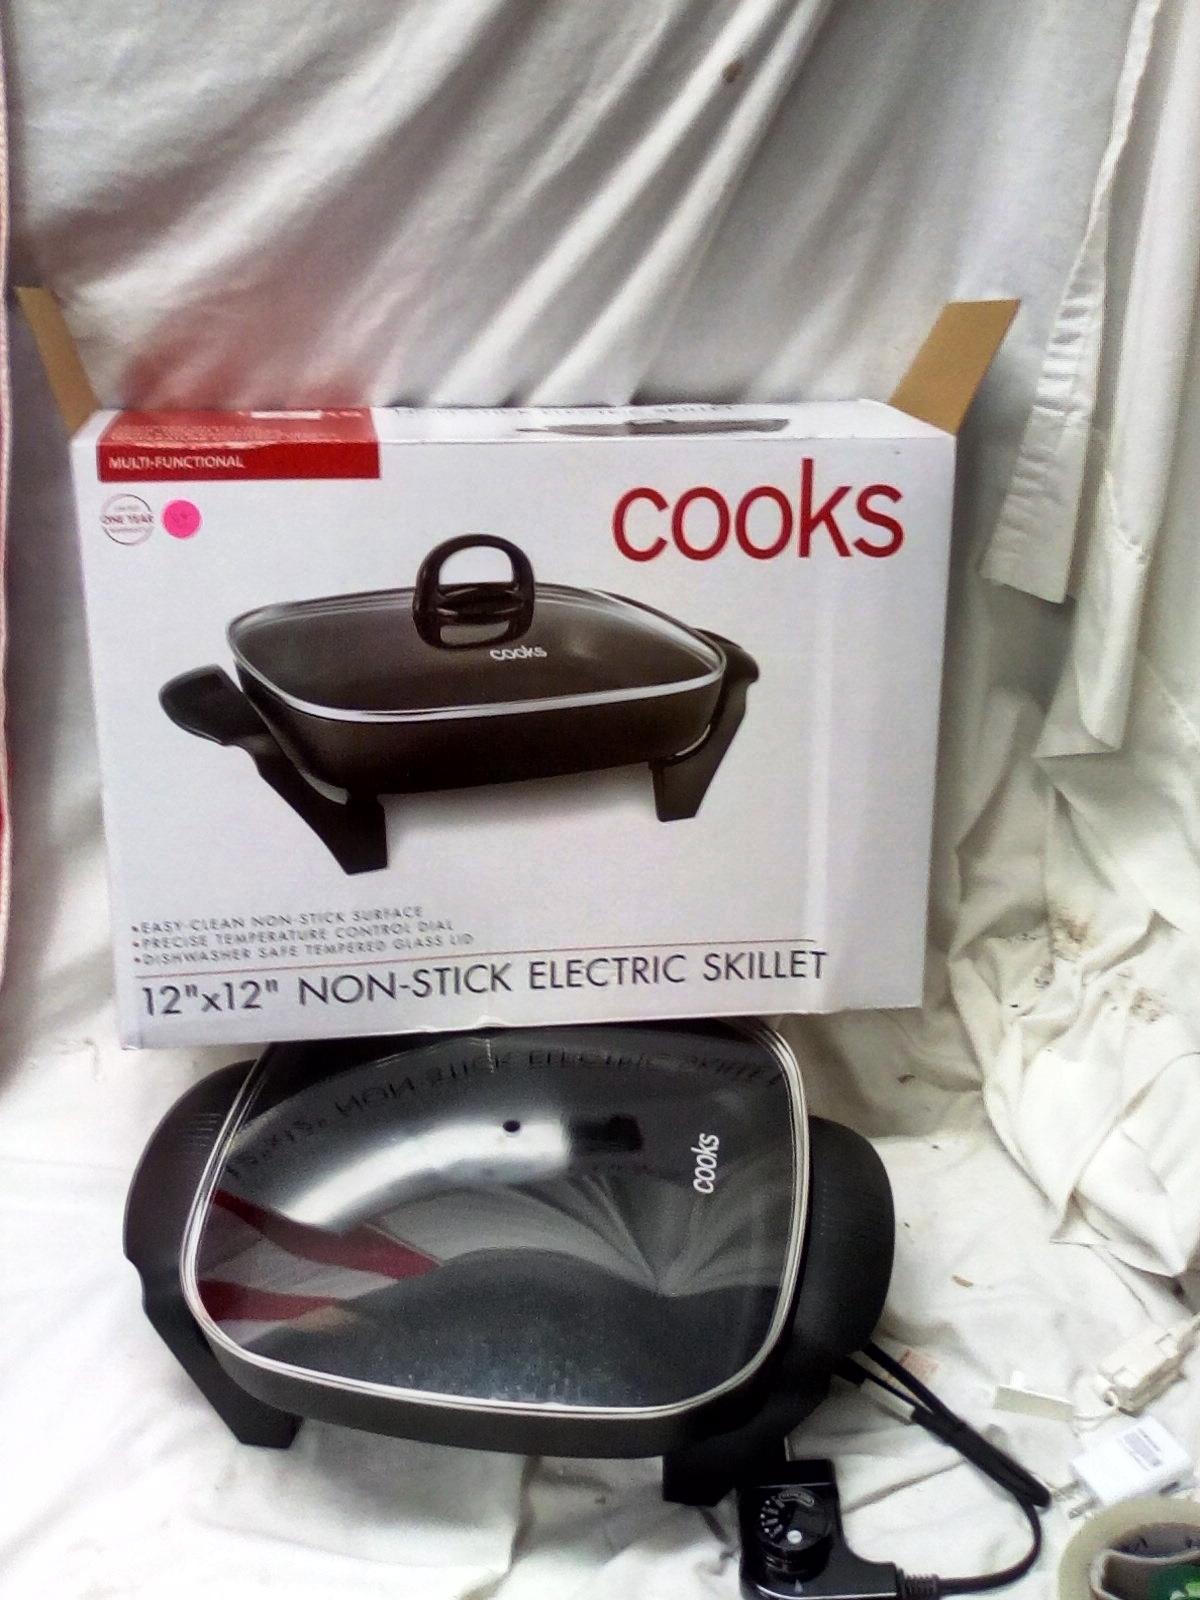 Cooks 12" X 12" Electric Skillet